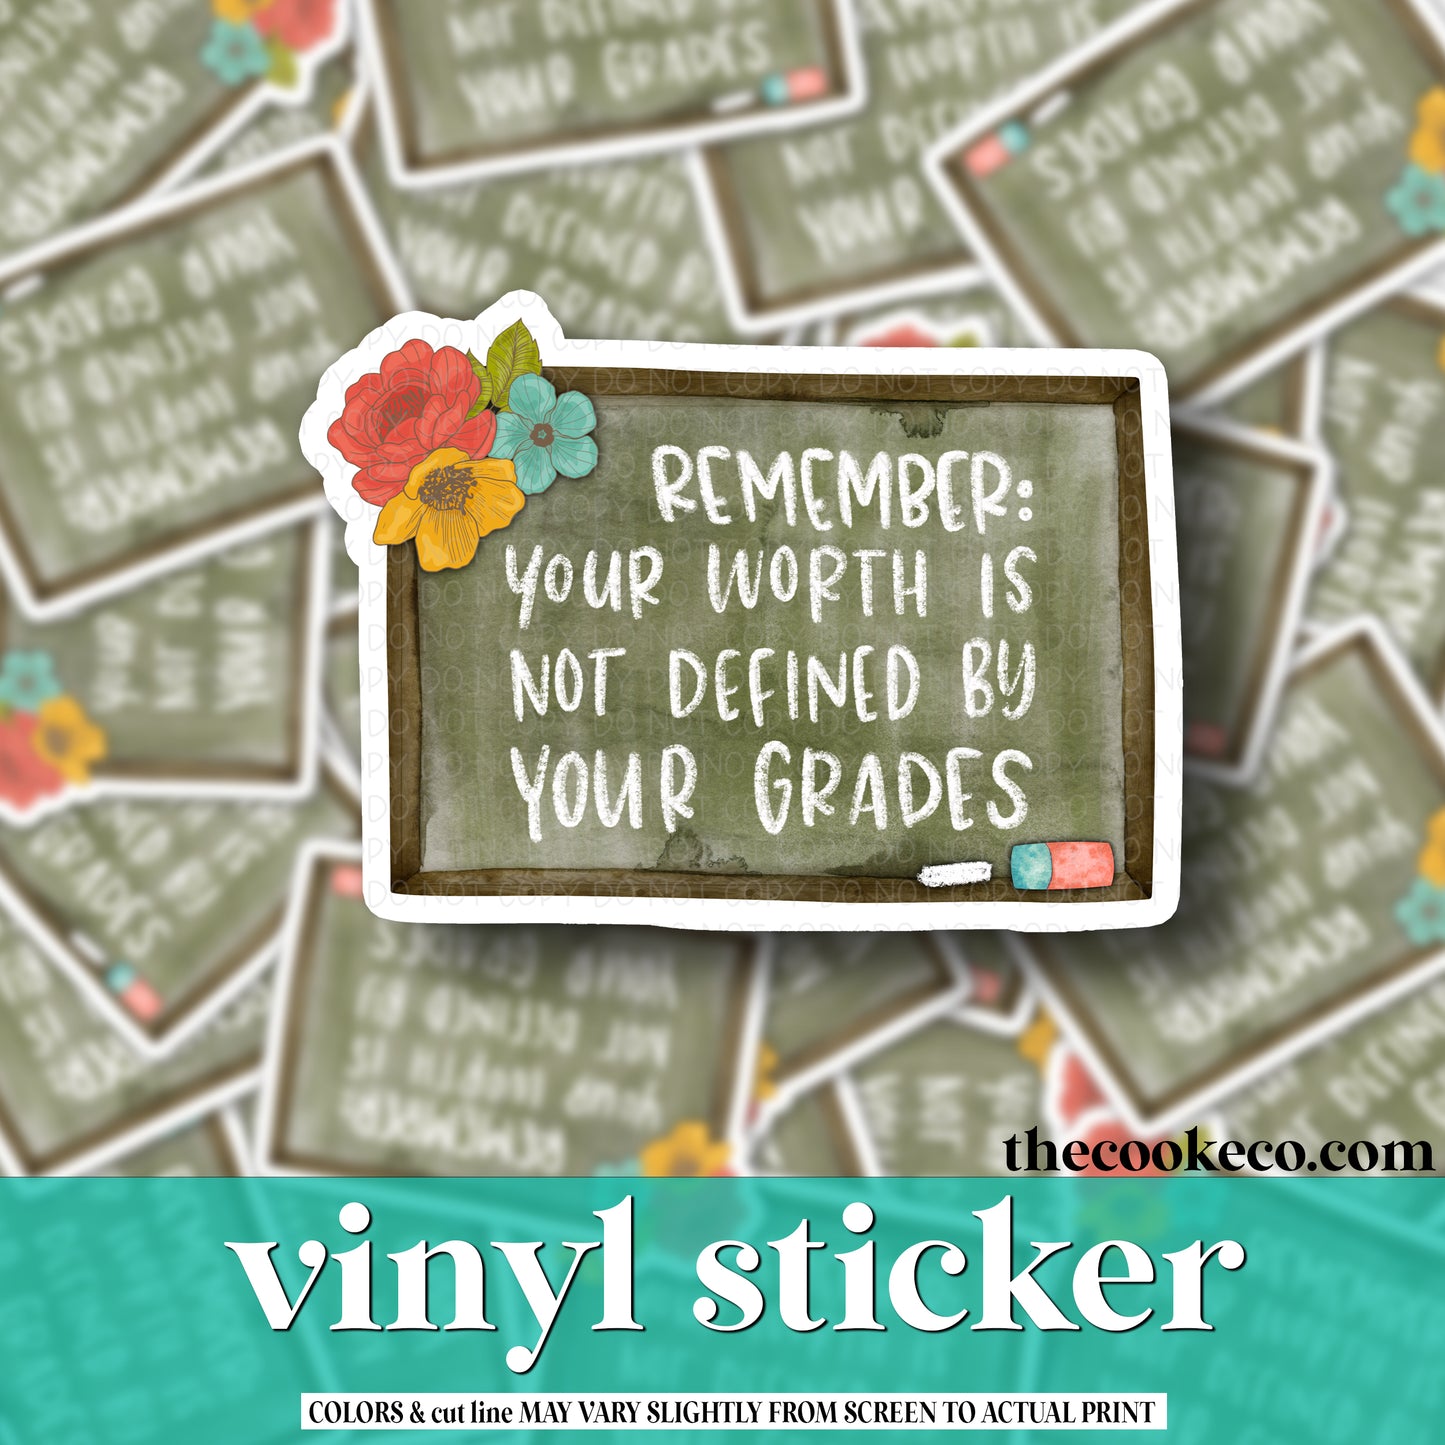 Vinyl Sticker | #V0773 - YOUR WORTH IS NOT DEFINED BY YOUR GRADES